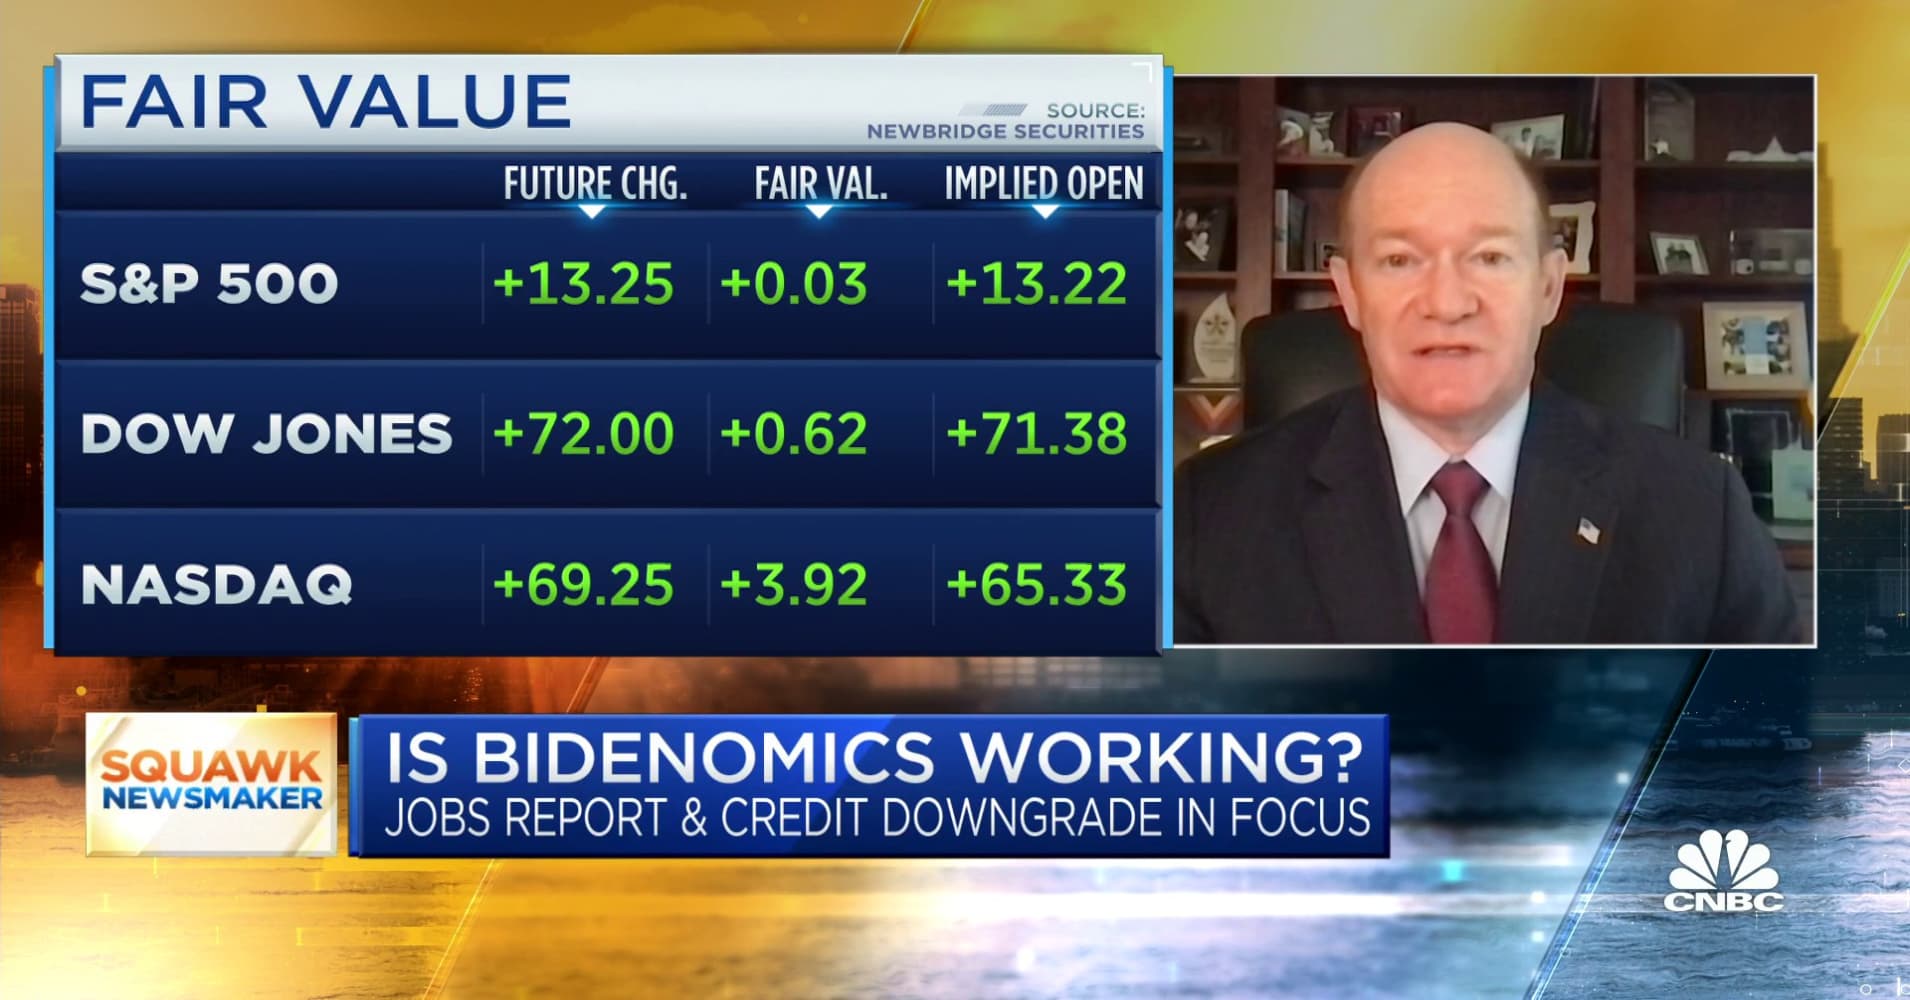 Sen. Chris Coons on Bidenomics: I think the polls will catch up with the record in time